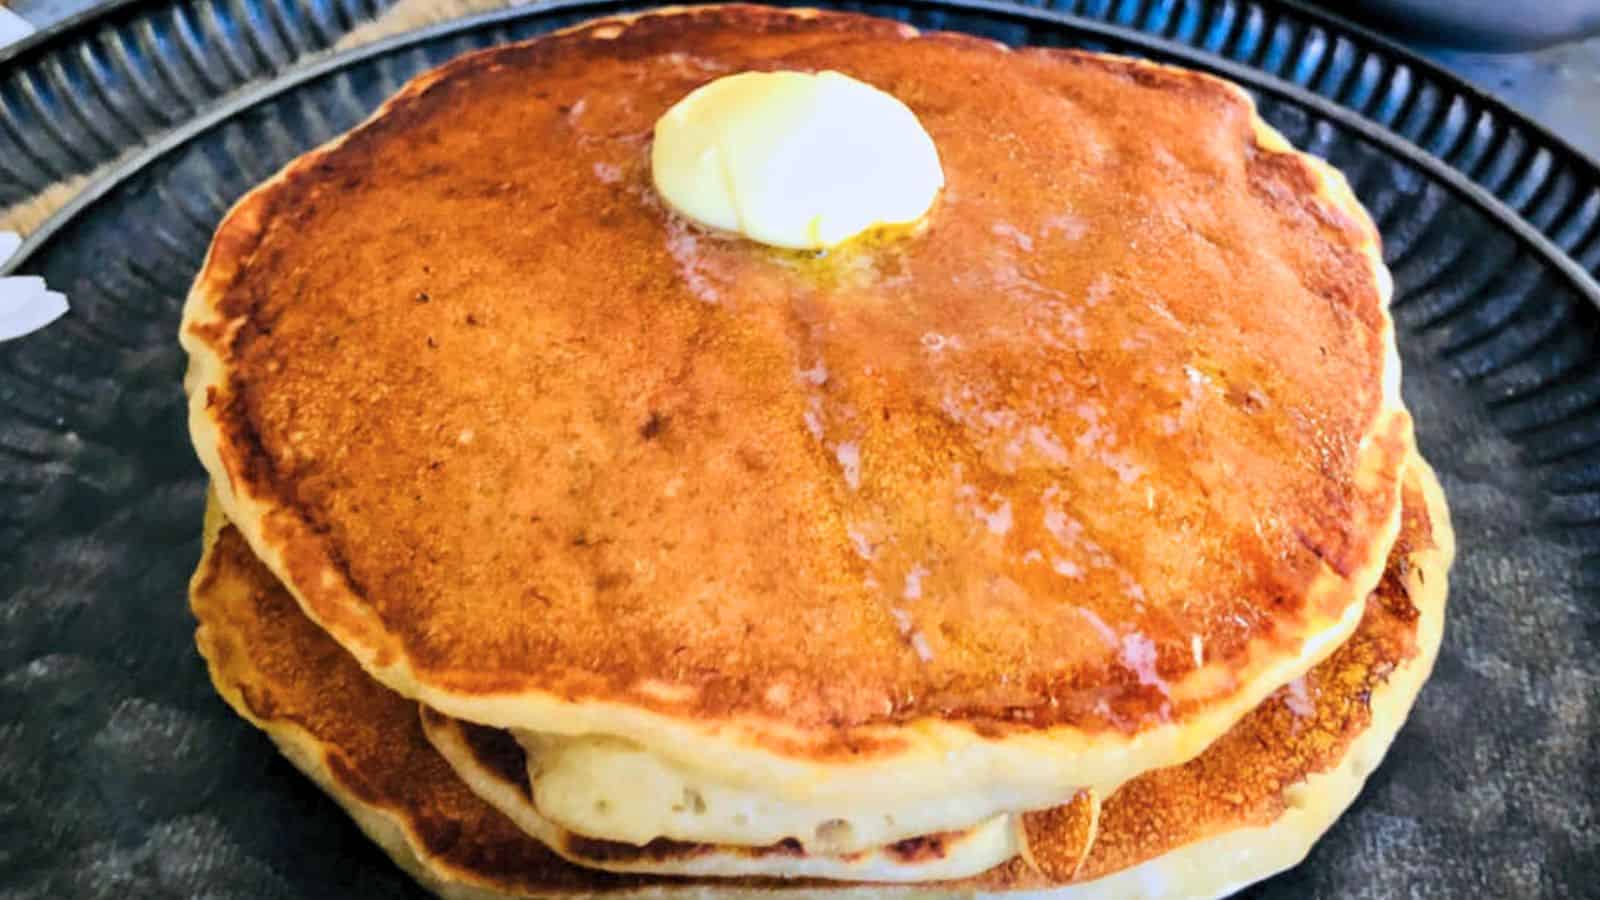 Stack of bananapancakes with a pat of butter on top, served on a plate.